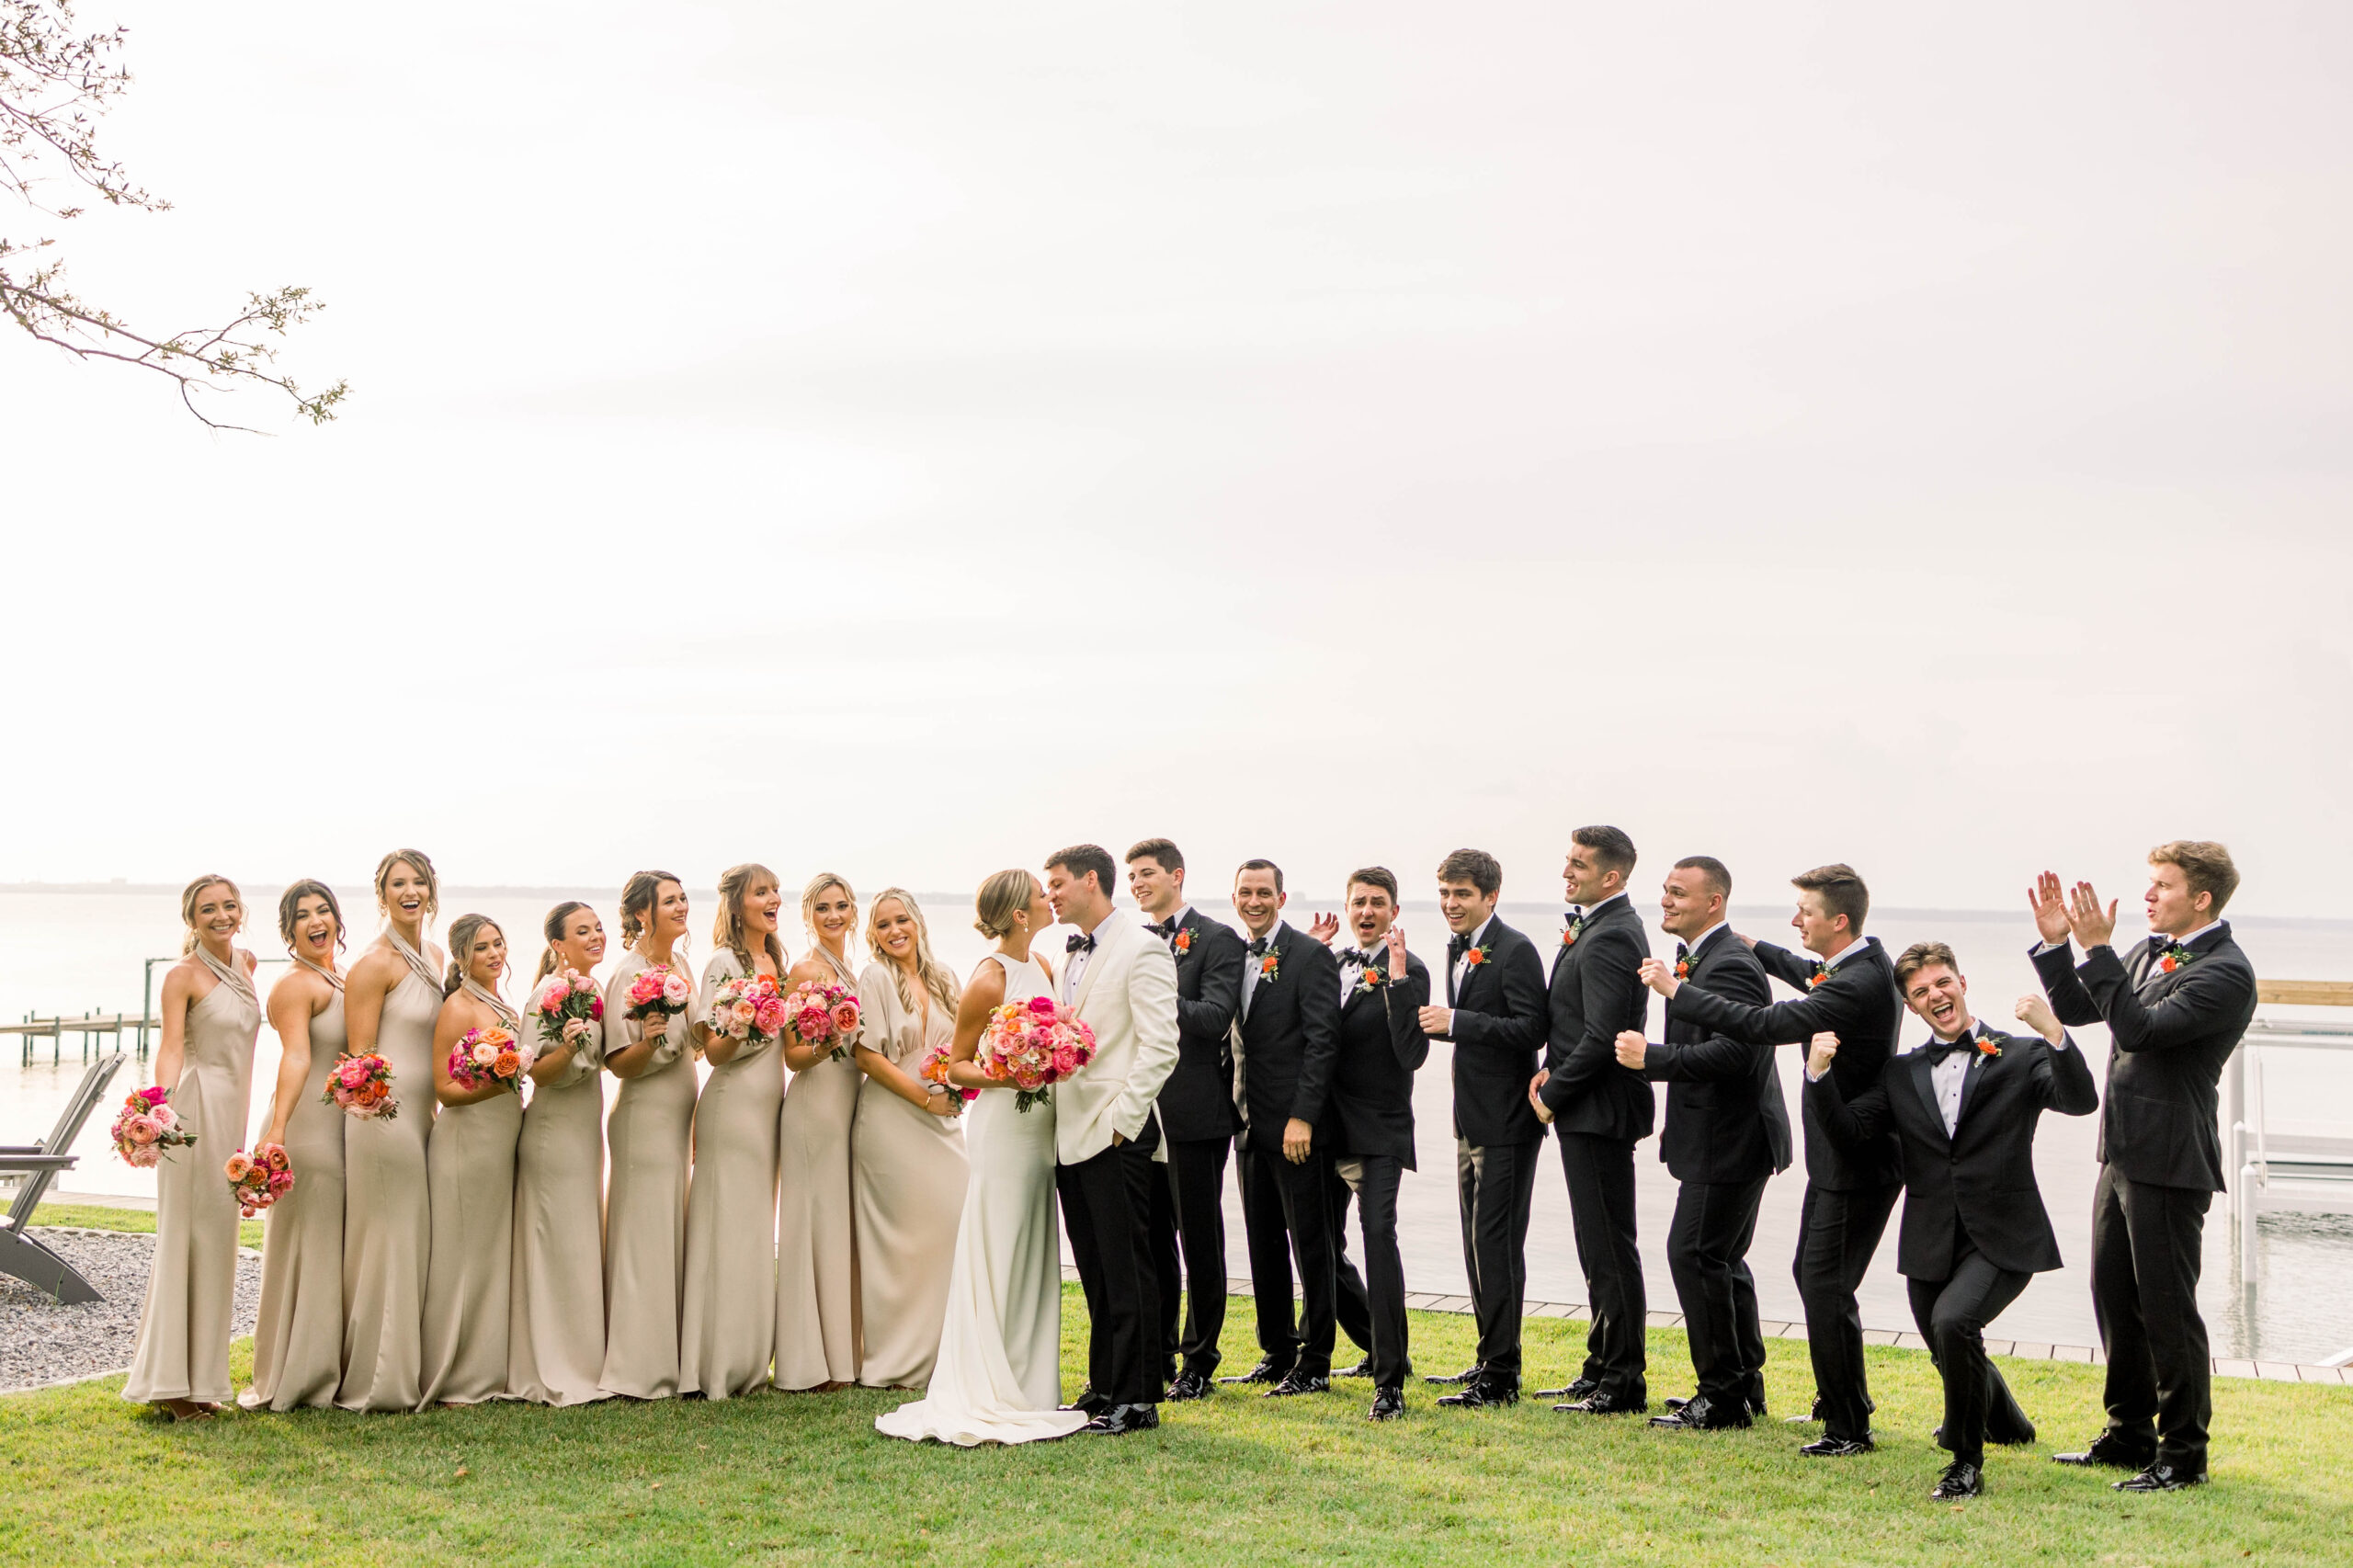 Bridal Party posing on a wedding day while bride and groom kiss